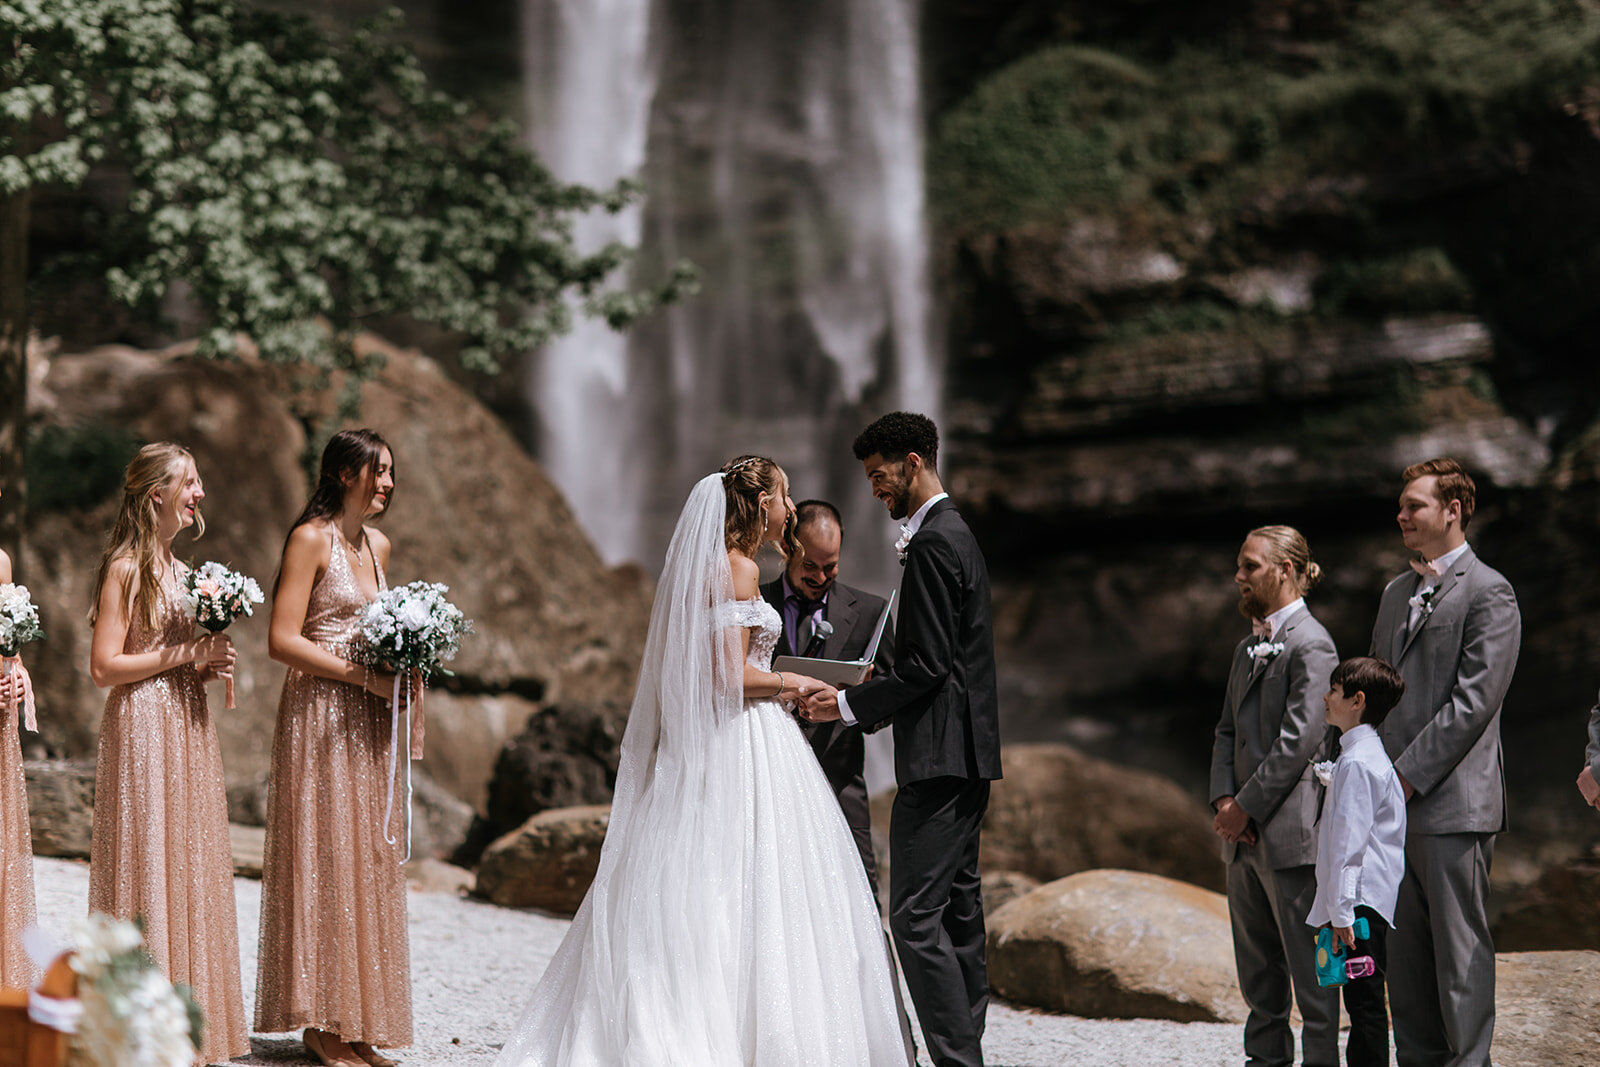 Intimate Waterfall Wedding at Toccoa Falls | Asheville Elopement Photographer